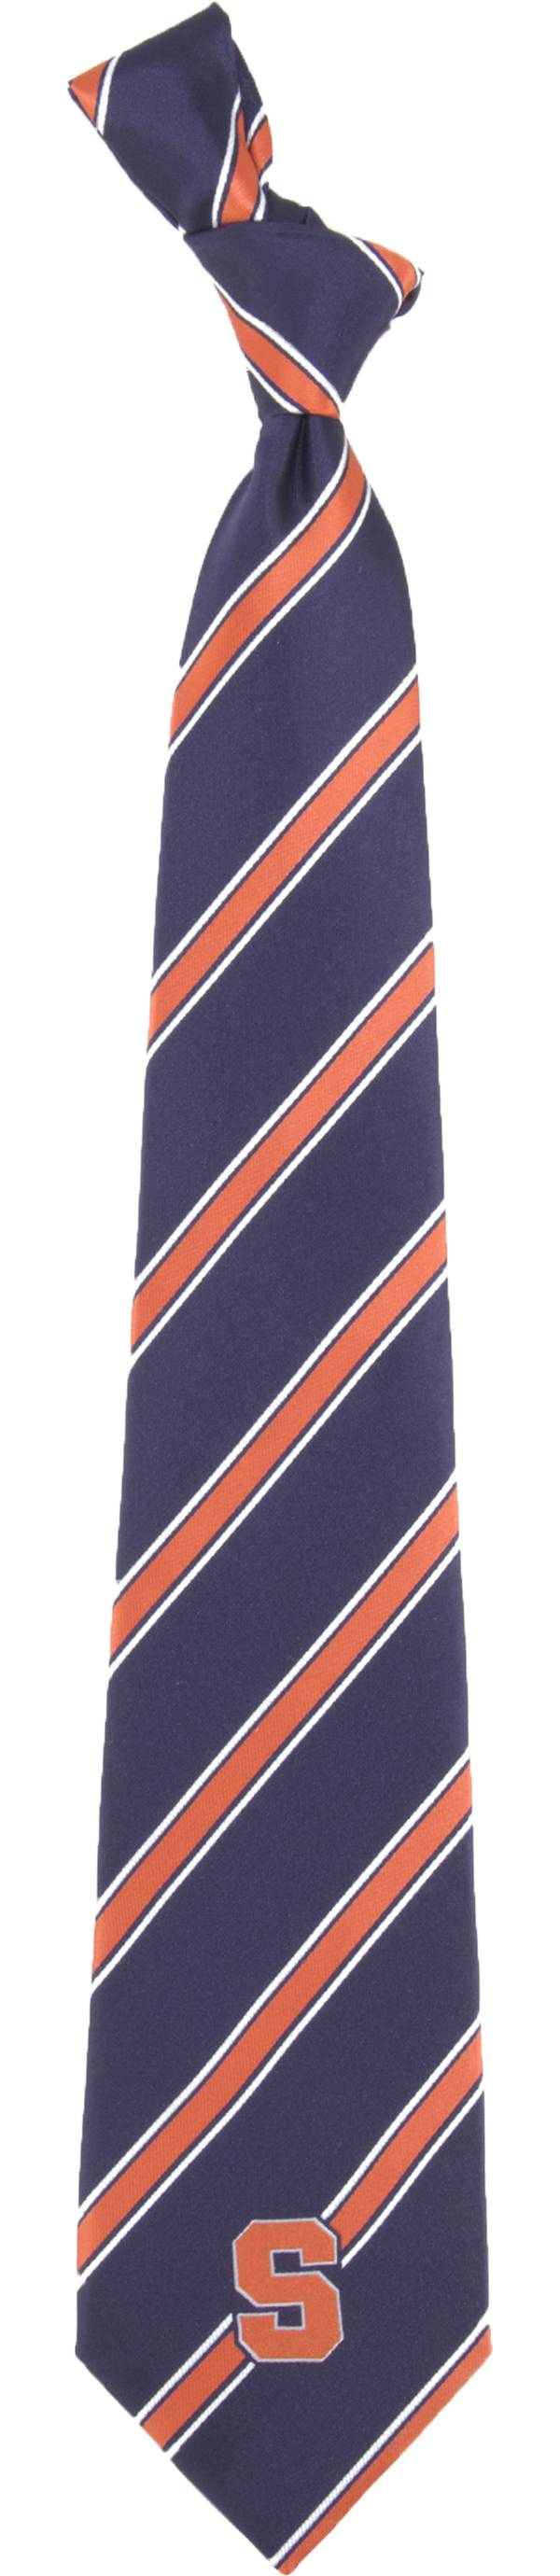 Eagles Wings Syracuse Orange Woven Poly 1 Necktie product image